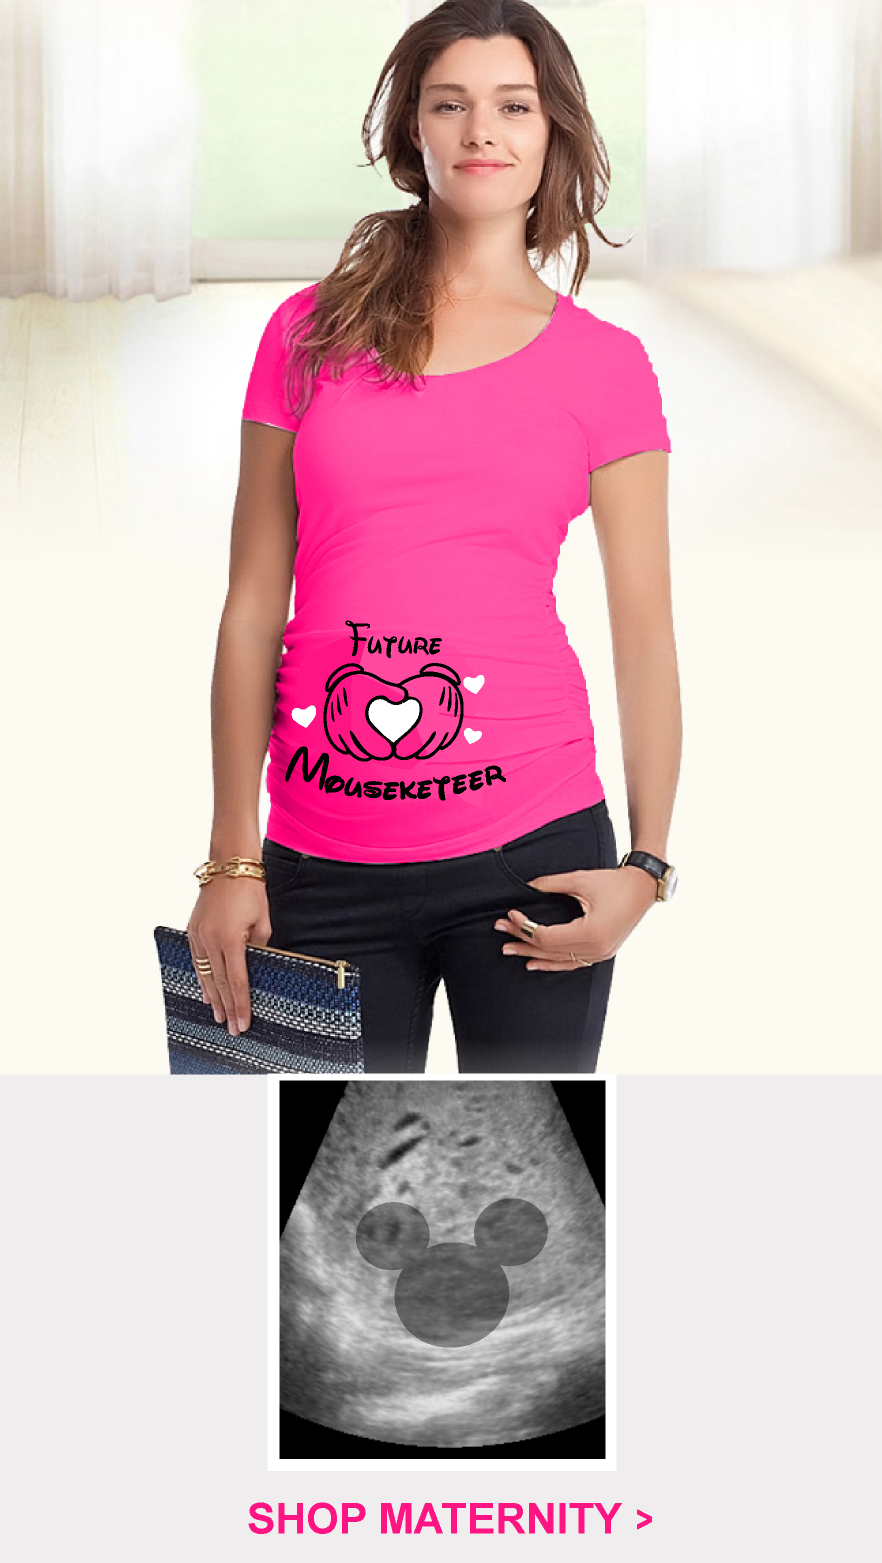 Lady in pink Maternity T Shirt with custom graphic and sonogram with mickey head